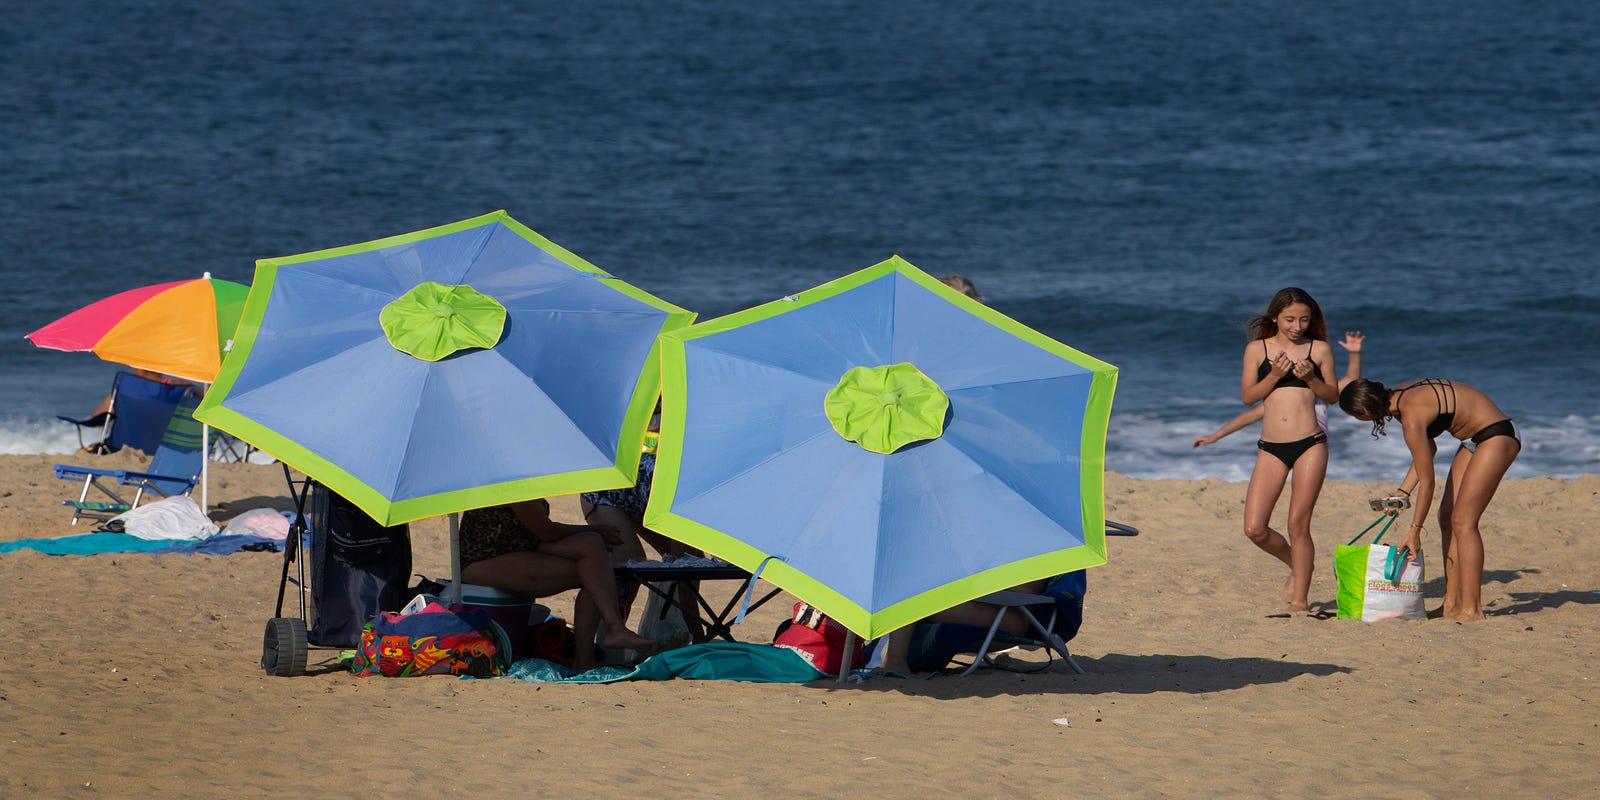 Belmar beach badge fees double for seniors, disabled; day rates up 1